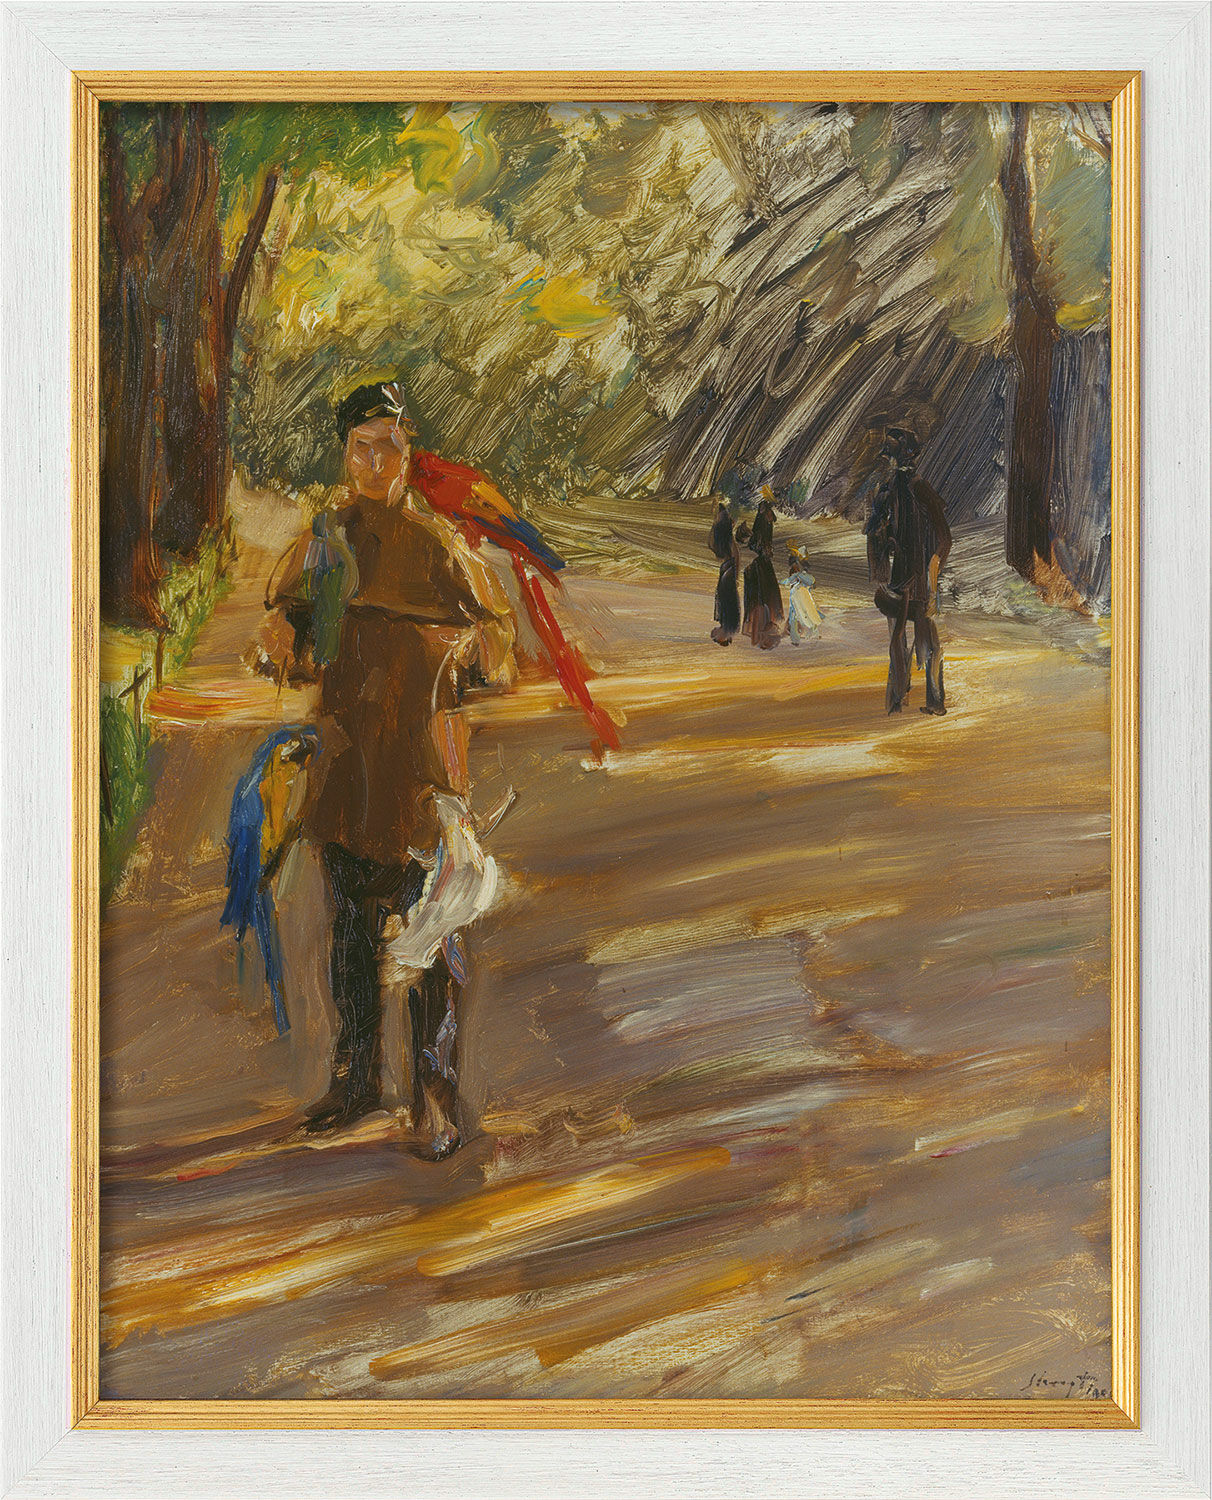 Picture "Parrot Man" (1901), white and golden framed version by Max Slevogt